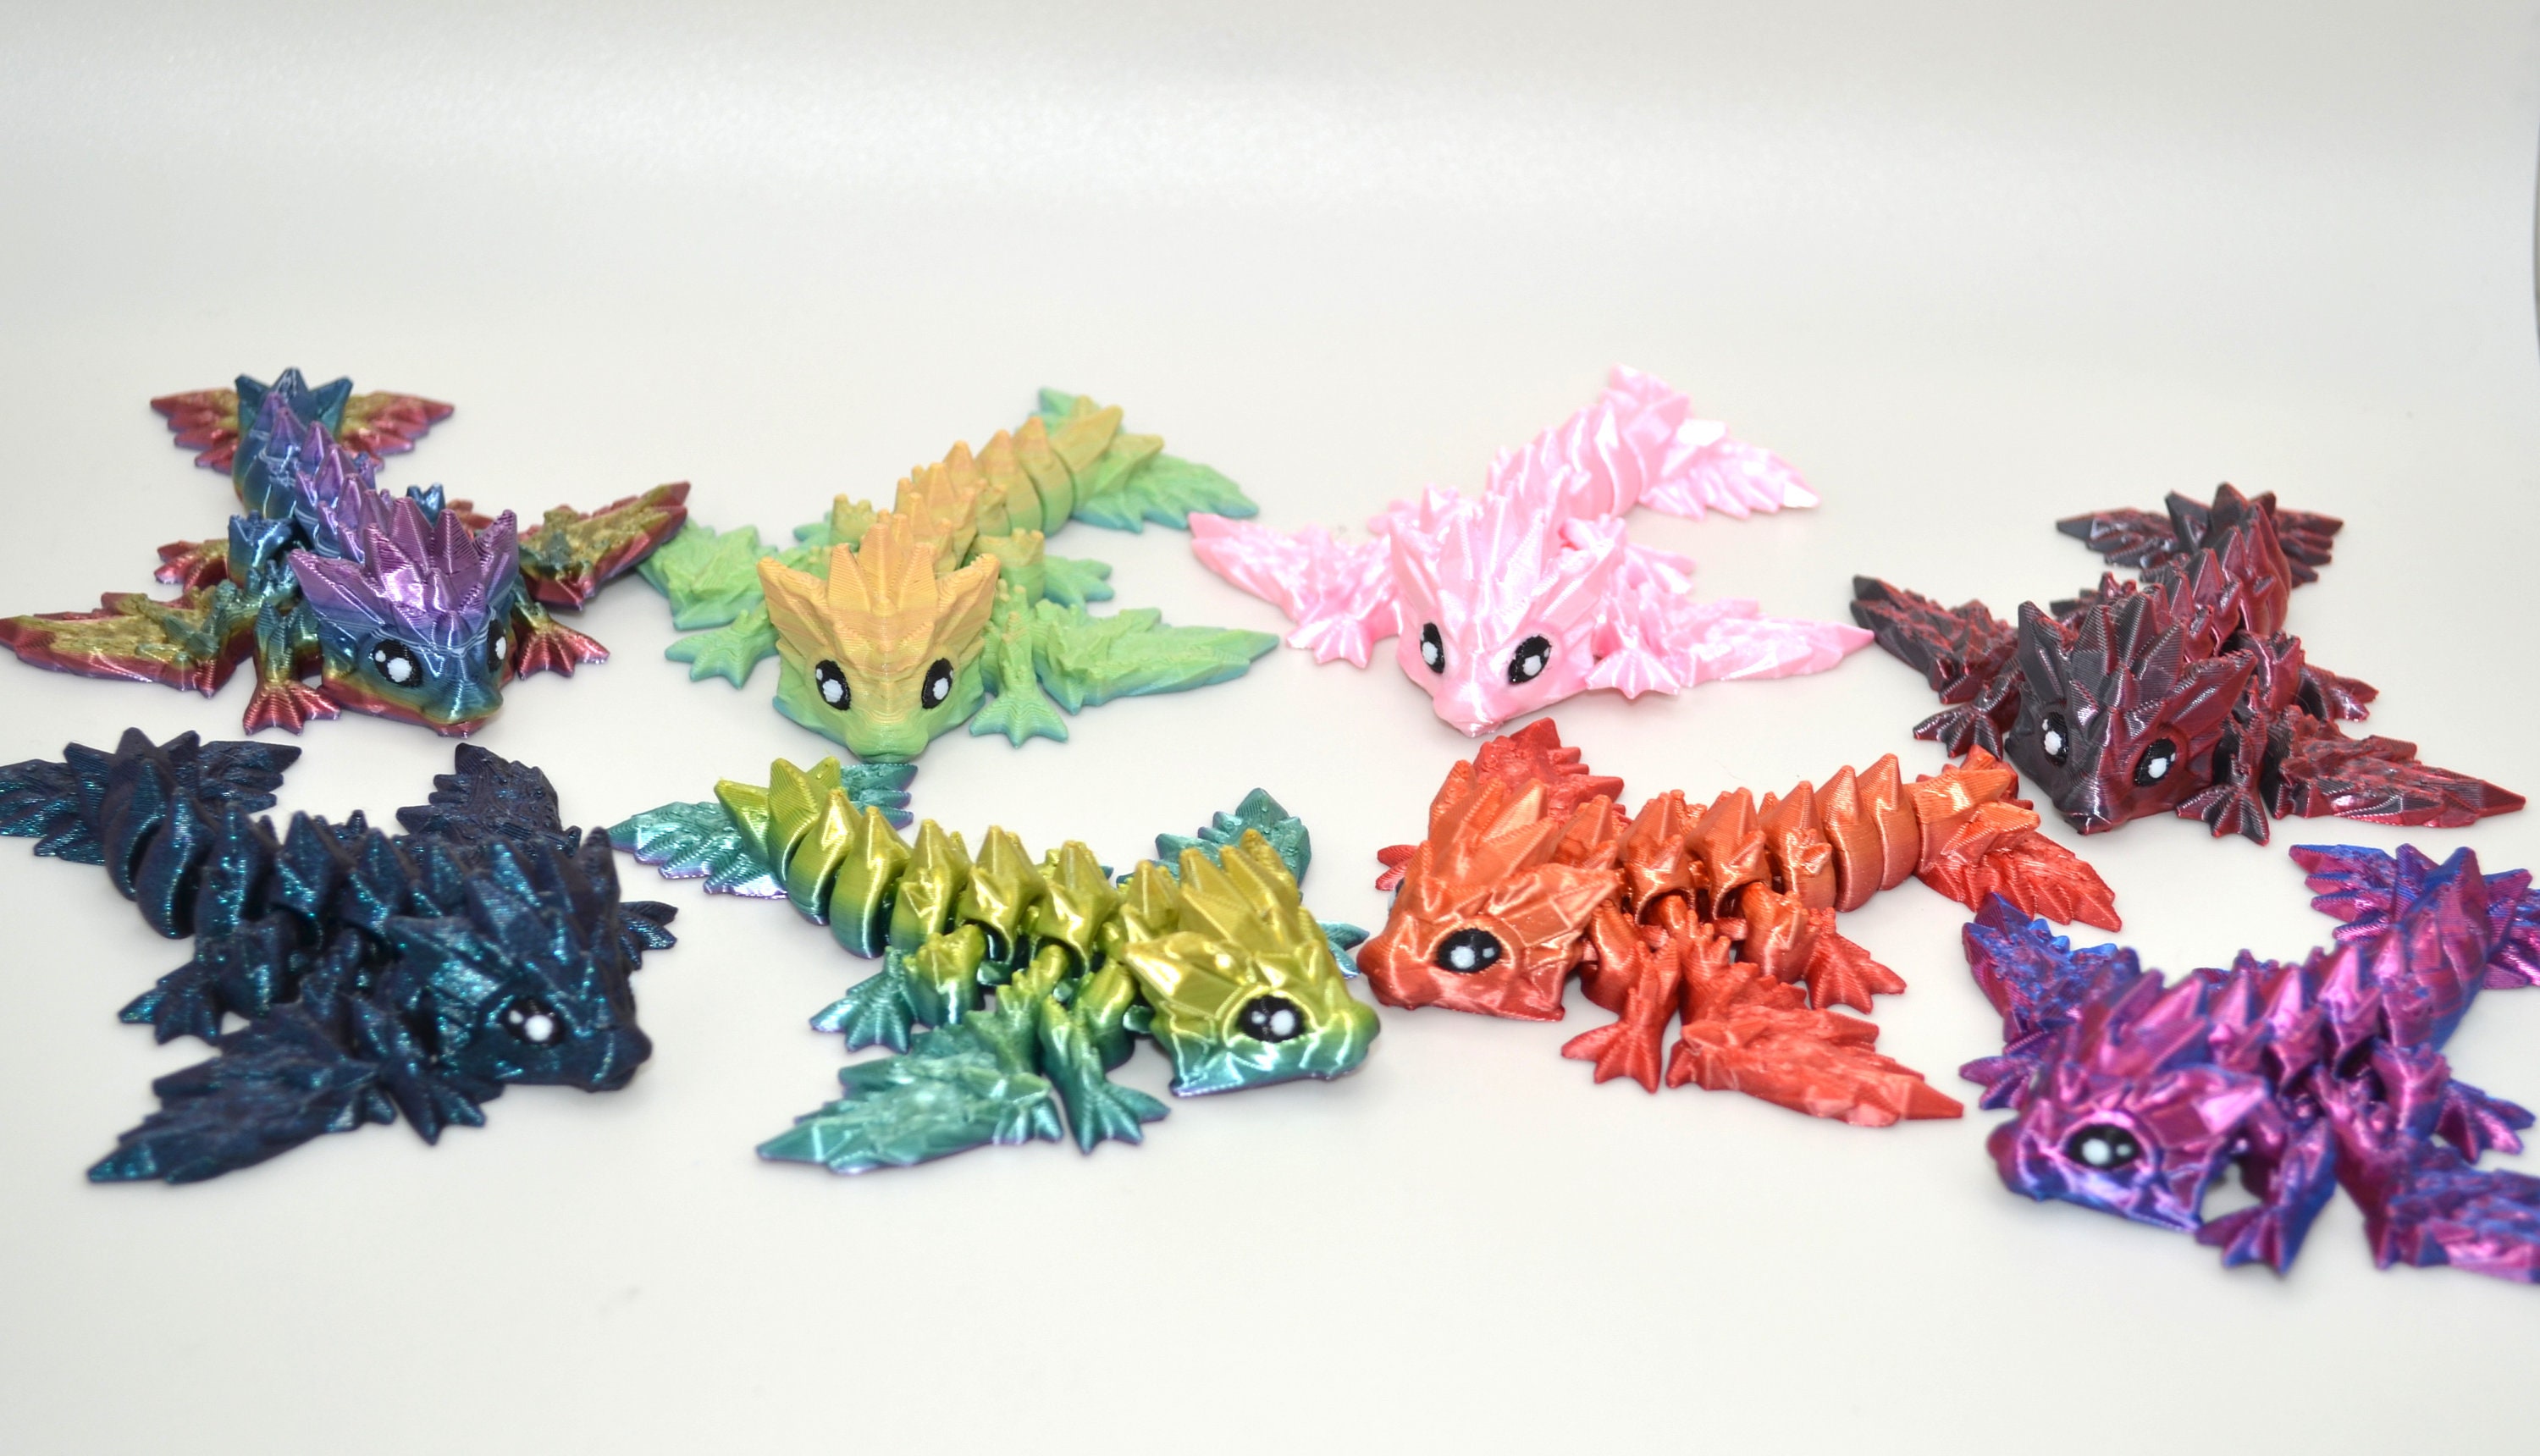 Buy 3D Printed Crystal Dragon Dinosaur in Scale Egg Posable